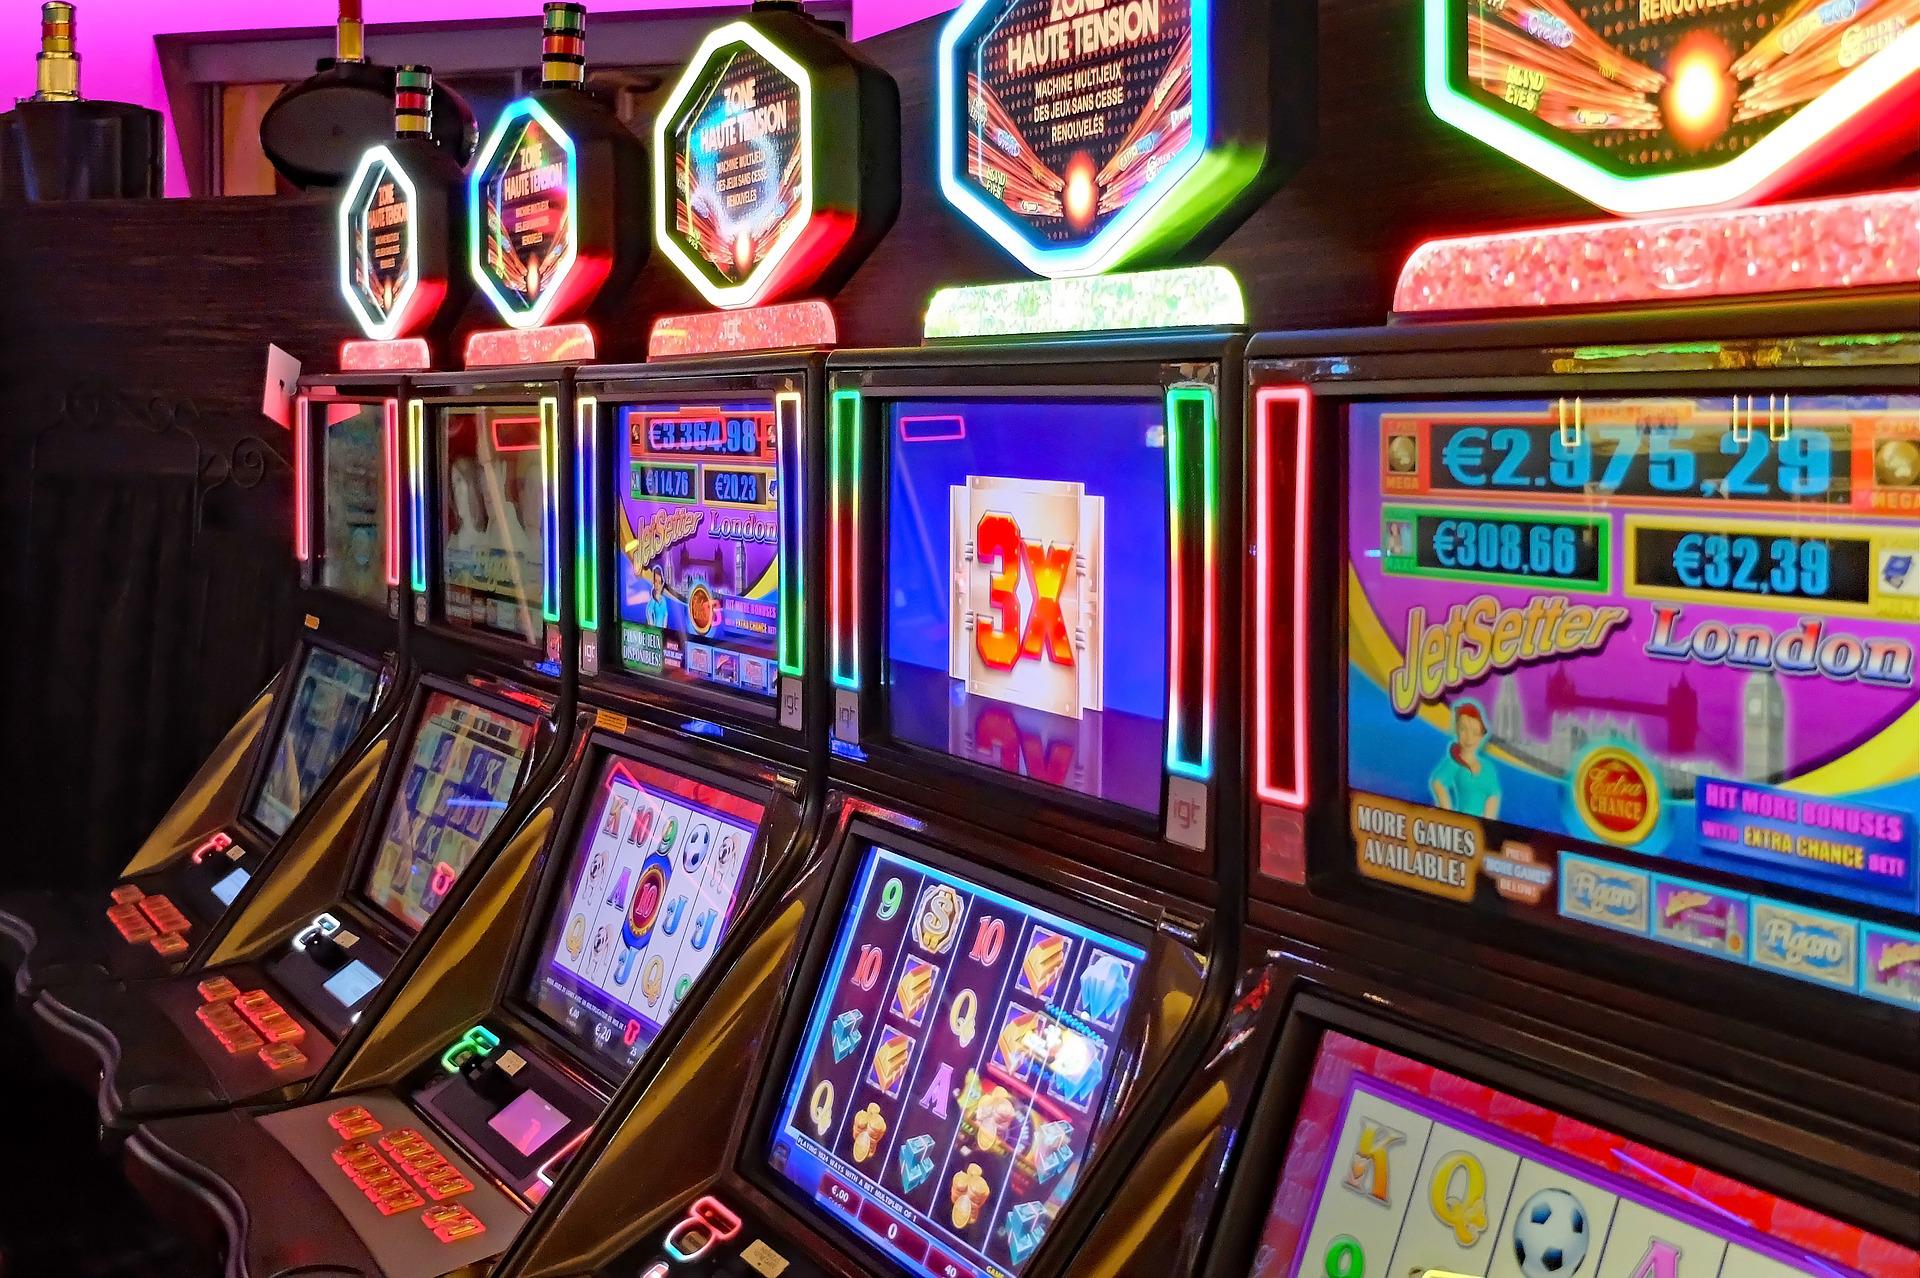 How to win on slot machines online – 7 tricks that work